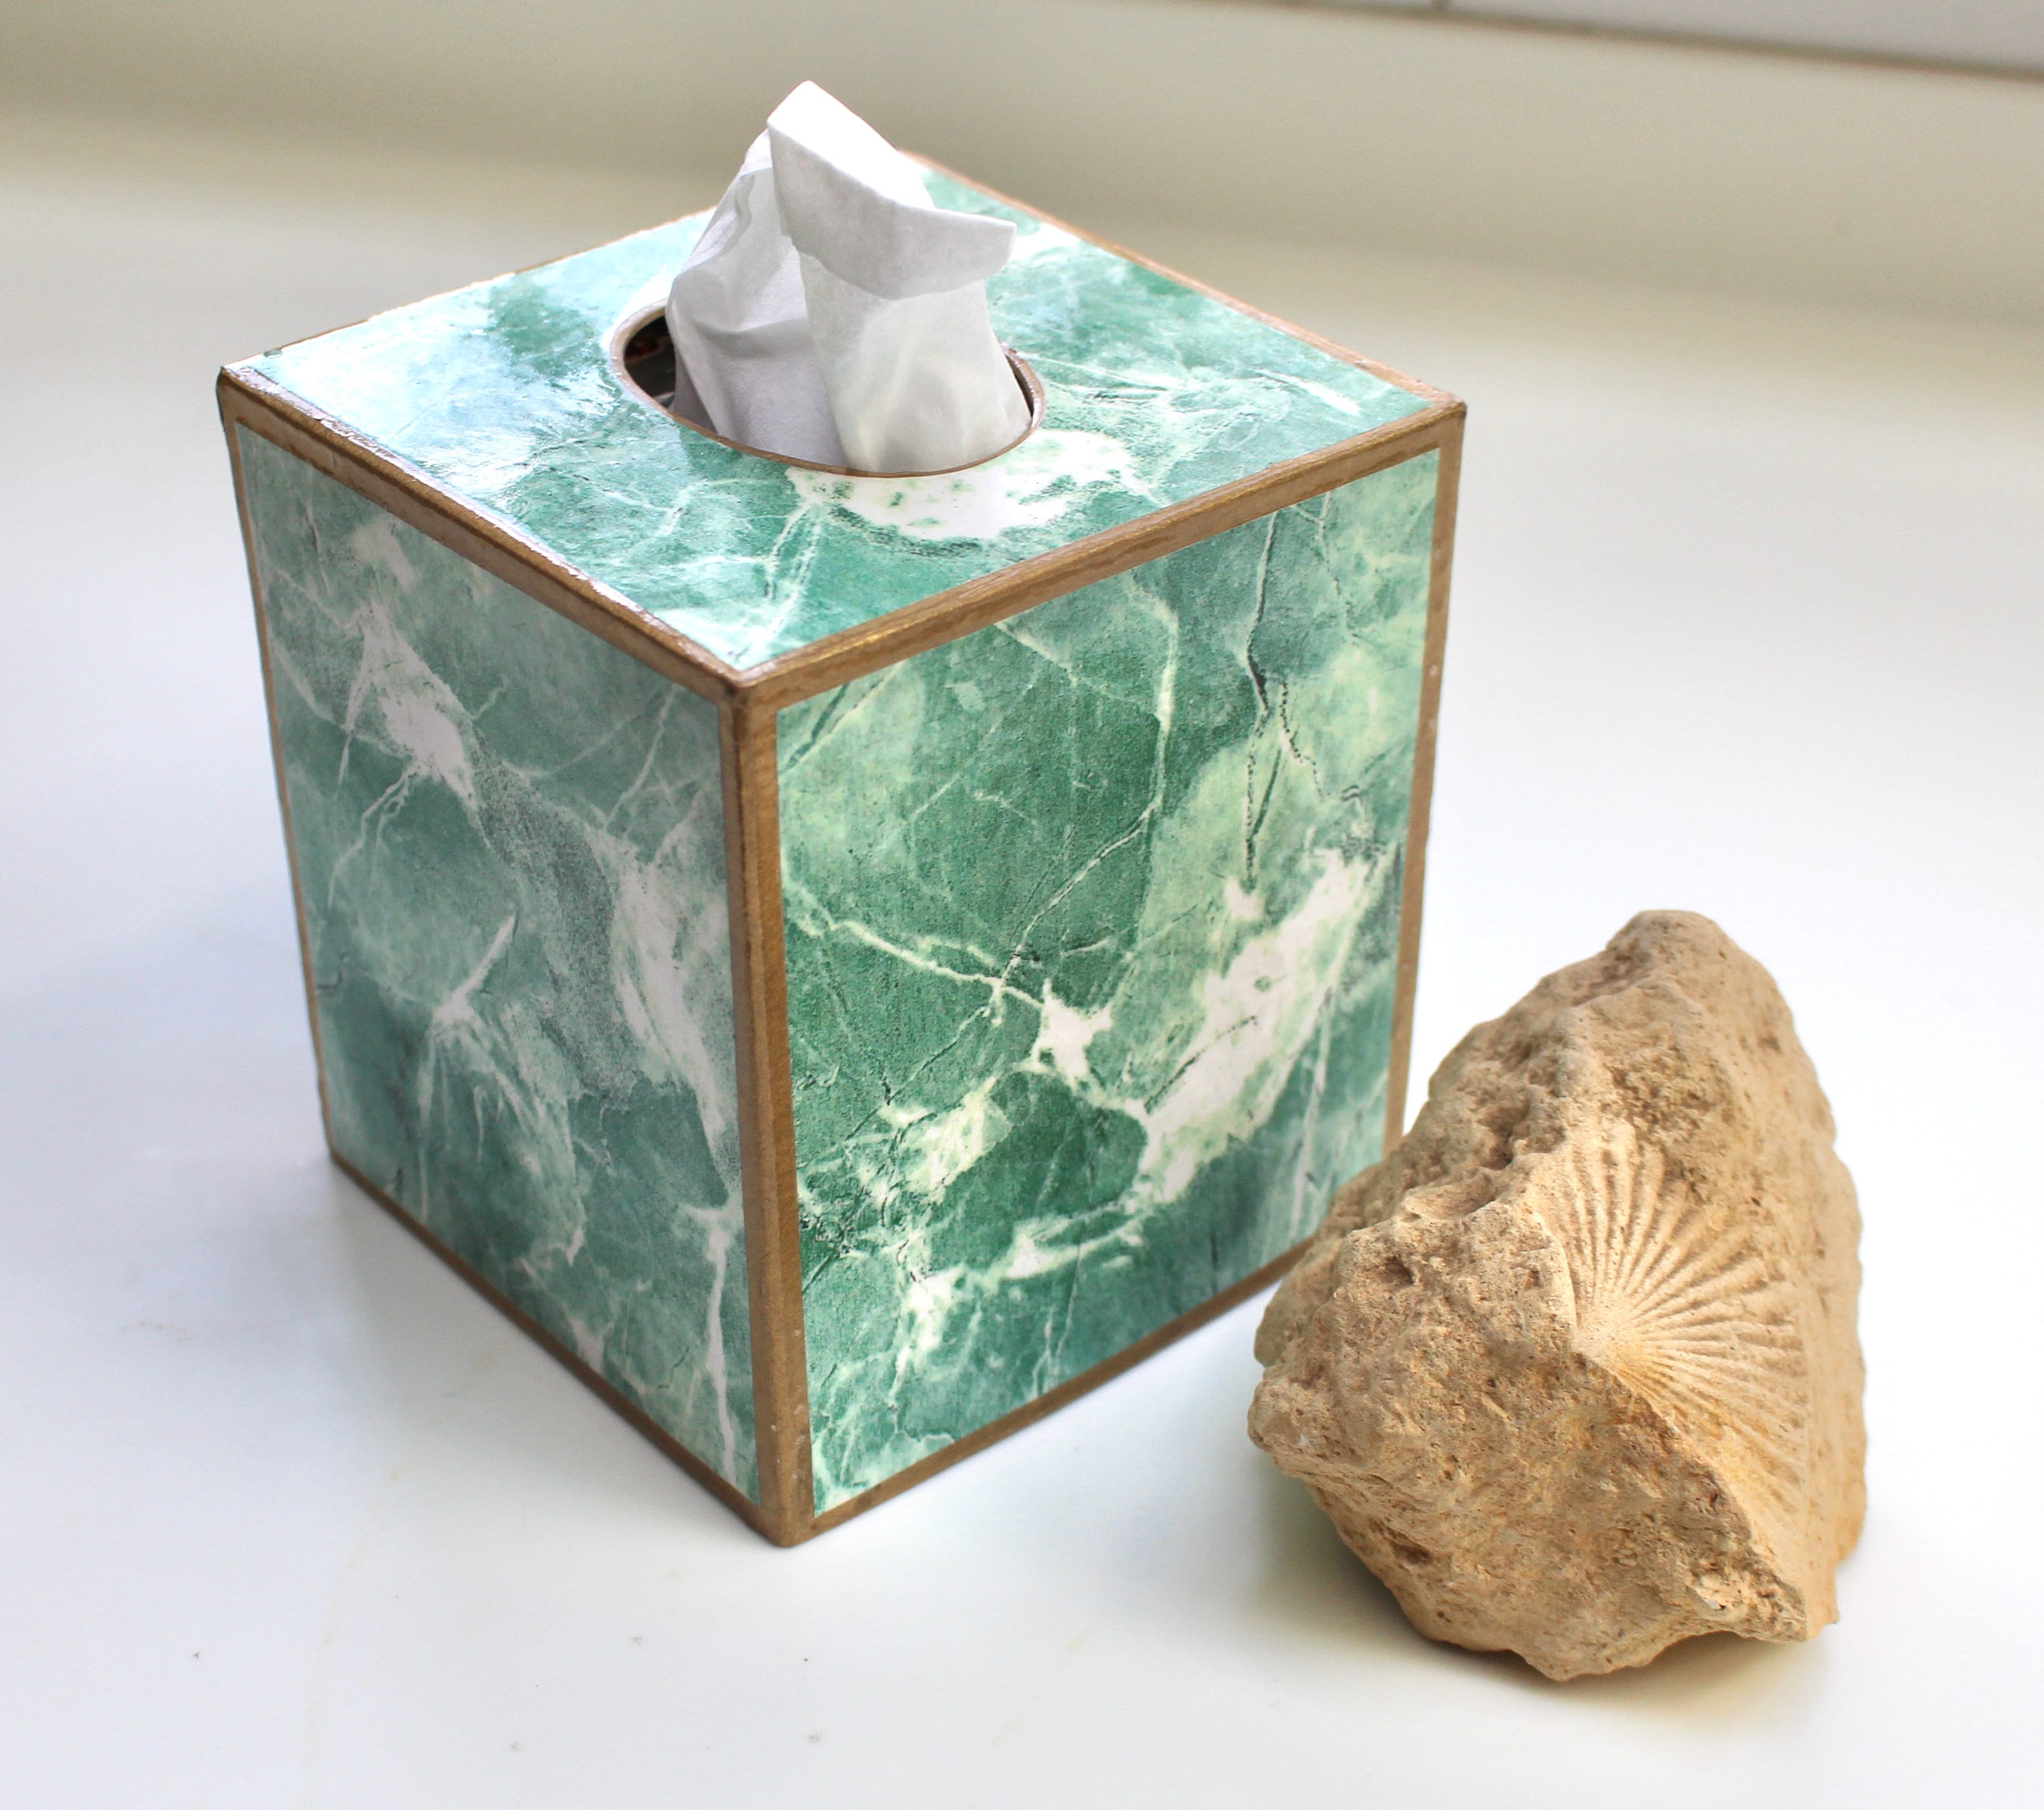 Green Marble Tissue Box Cover 